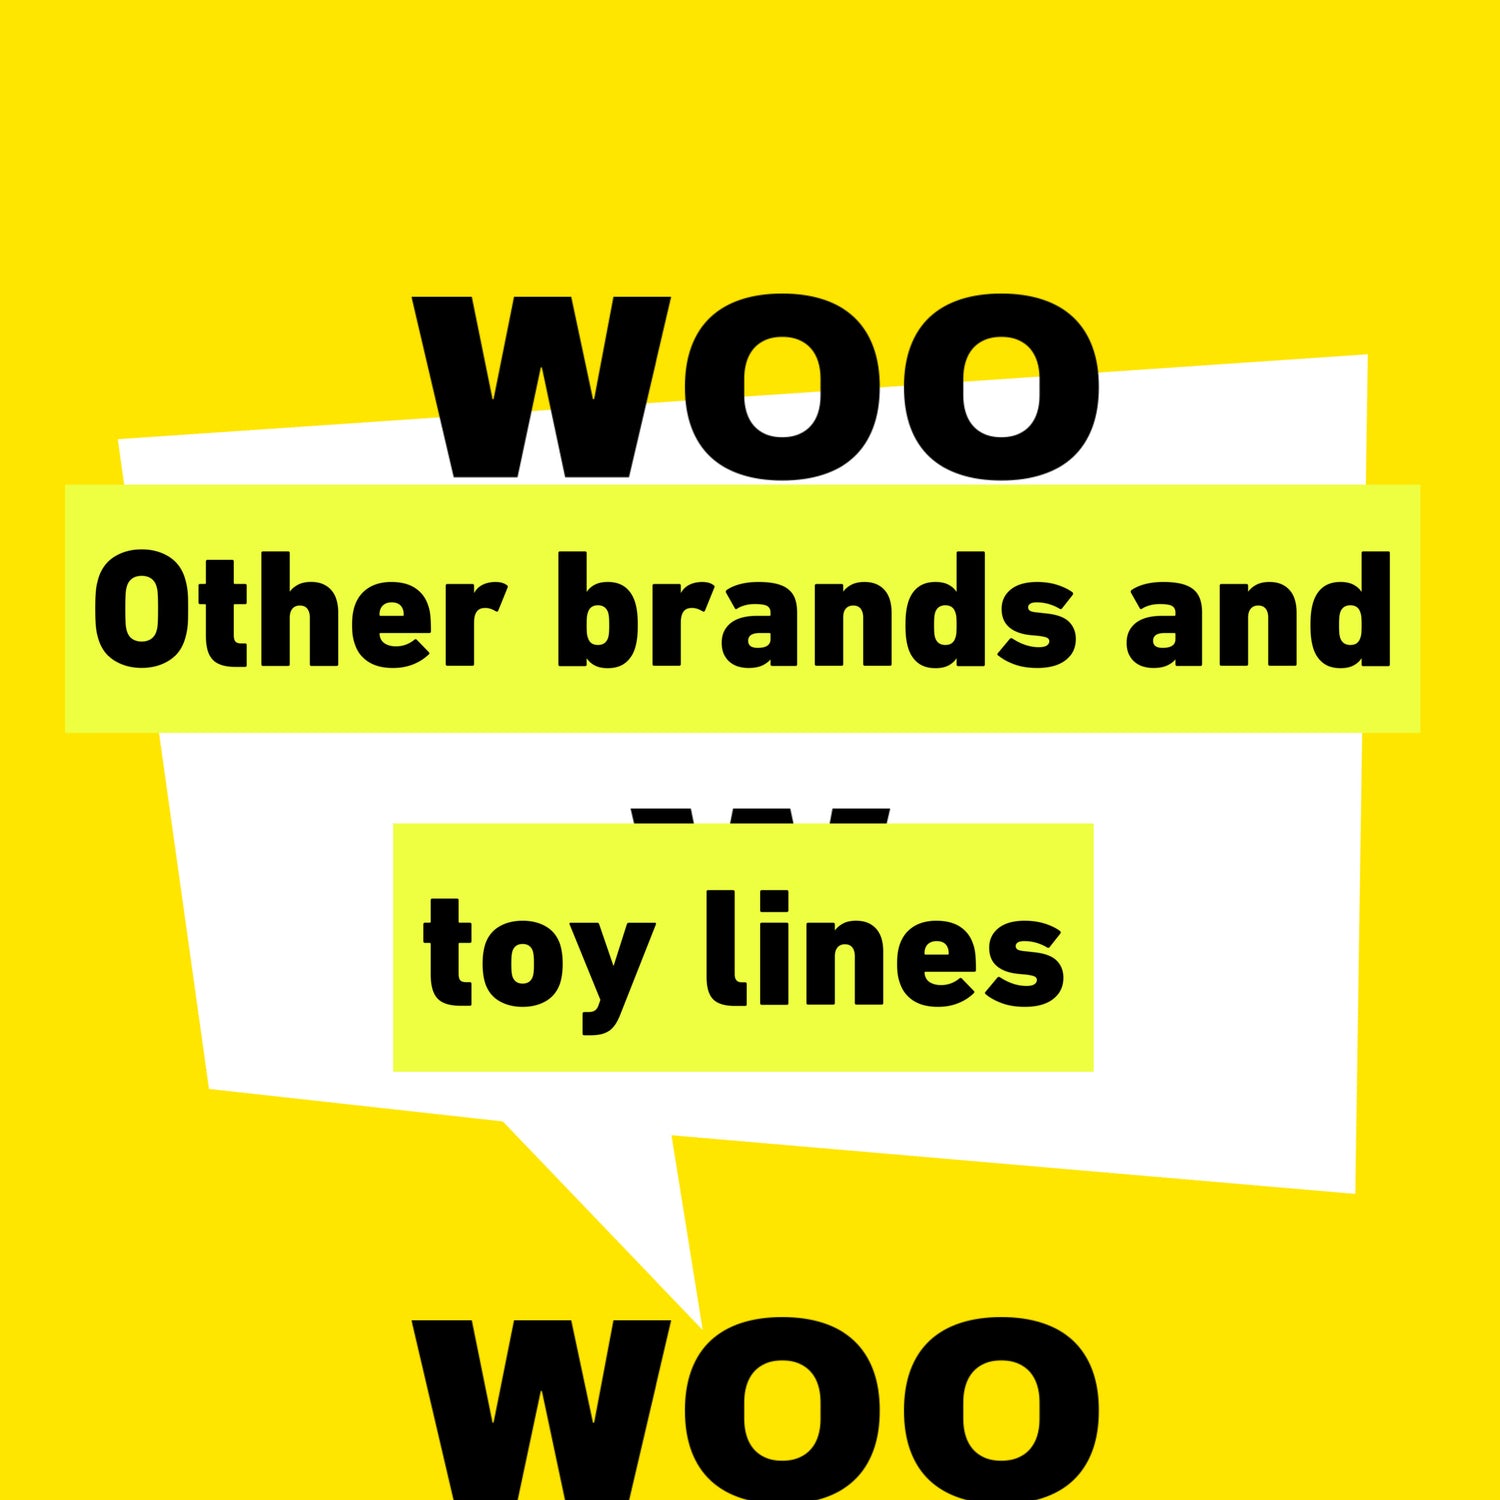 Other brands and toy lines